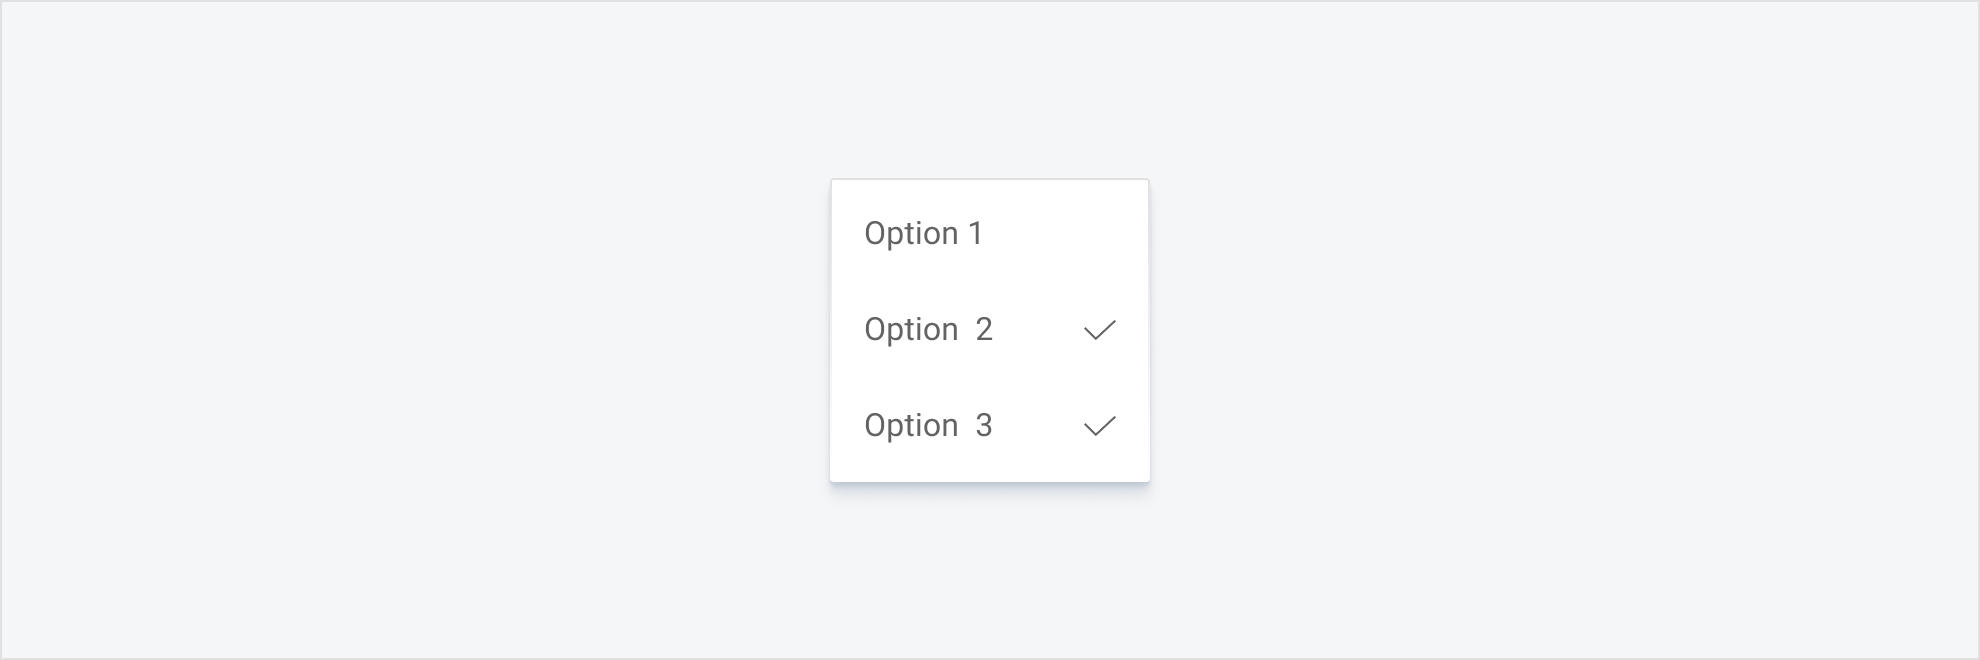 An action menu with selectable options in a list.